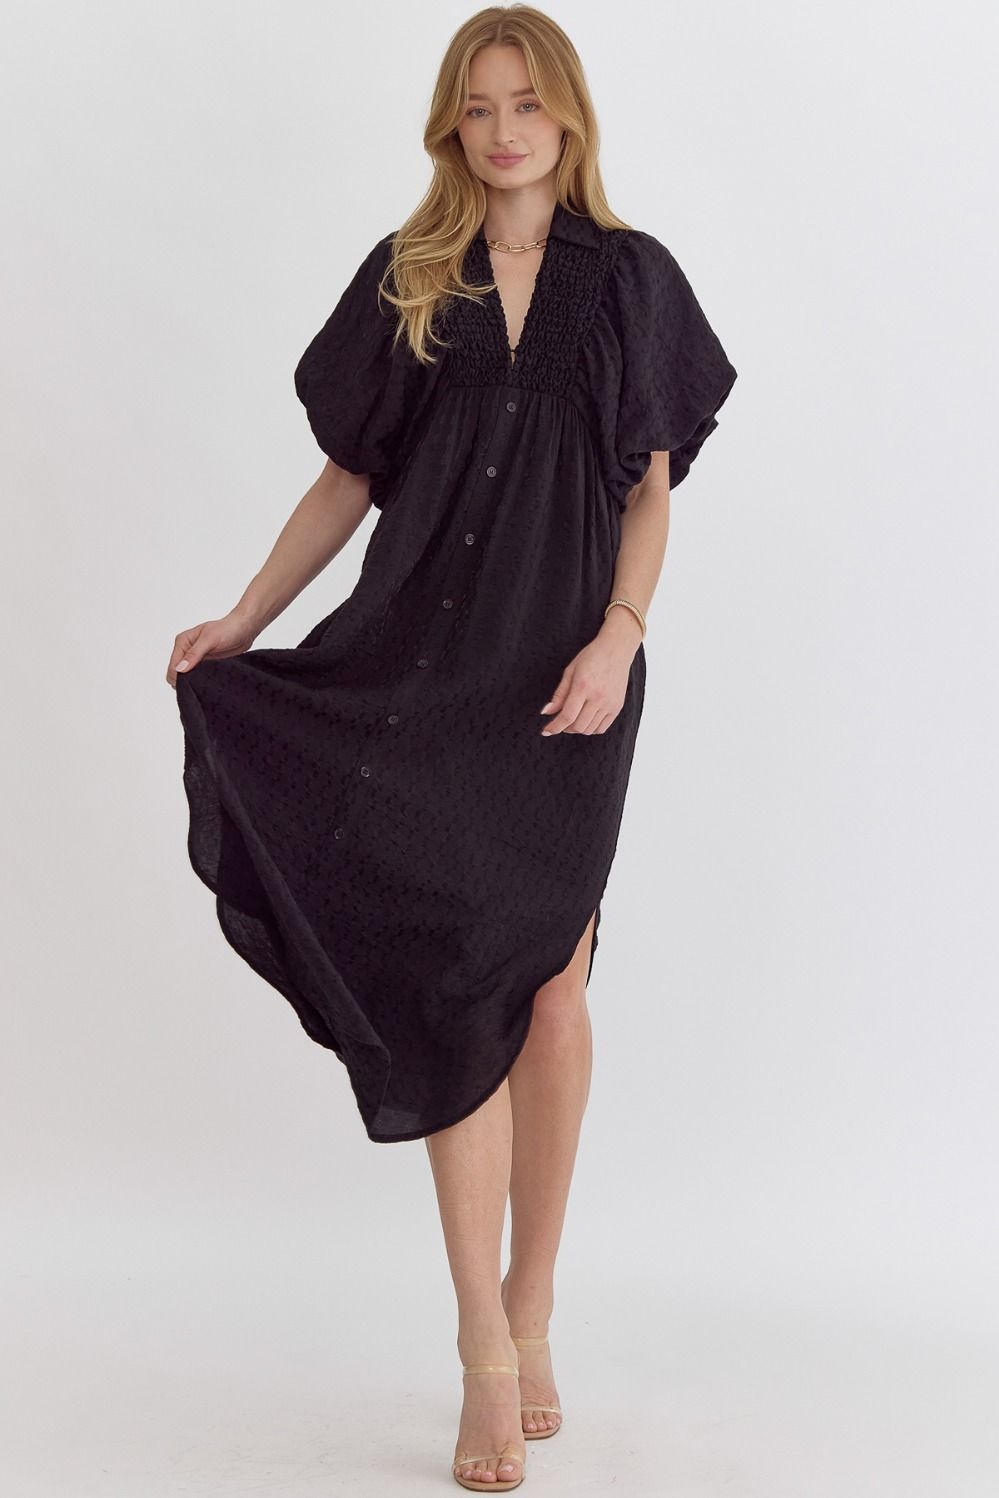 Slip into ultimate comfort and style with our Comfy &amp; Casual Dress! This midi dress features textured fabric, a flattering v-neckline, and playful bubble sleeves. The smocking detail at the chest adds a touch of charm, while the side slit and elastic cuffs provide a comfortable fit. Perfect for any occasion, this dress is lightweight and semi-sheer, making it a must-have for any wardrobe.